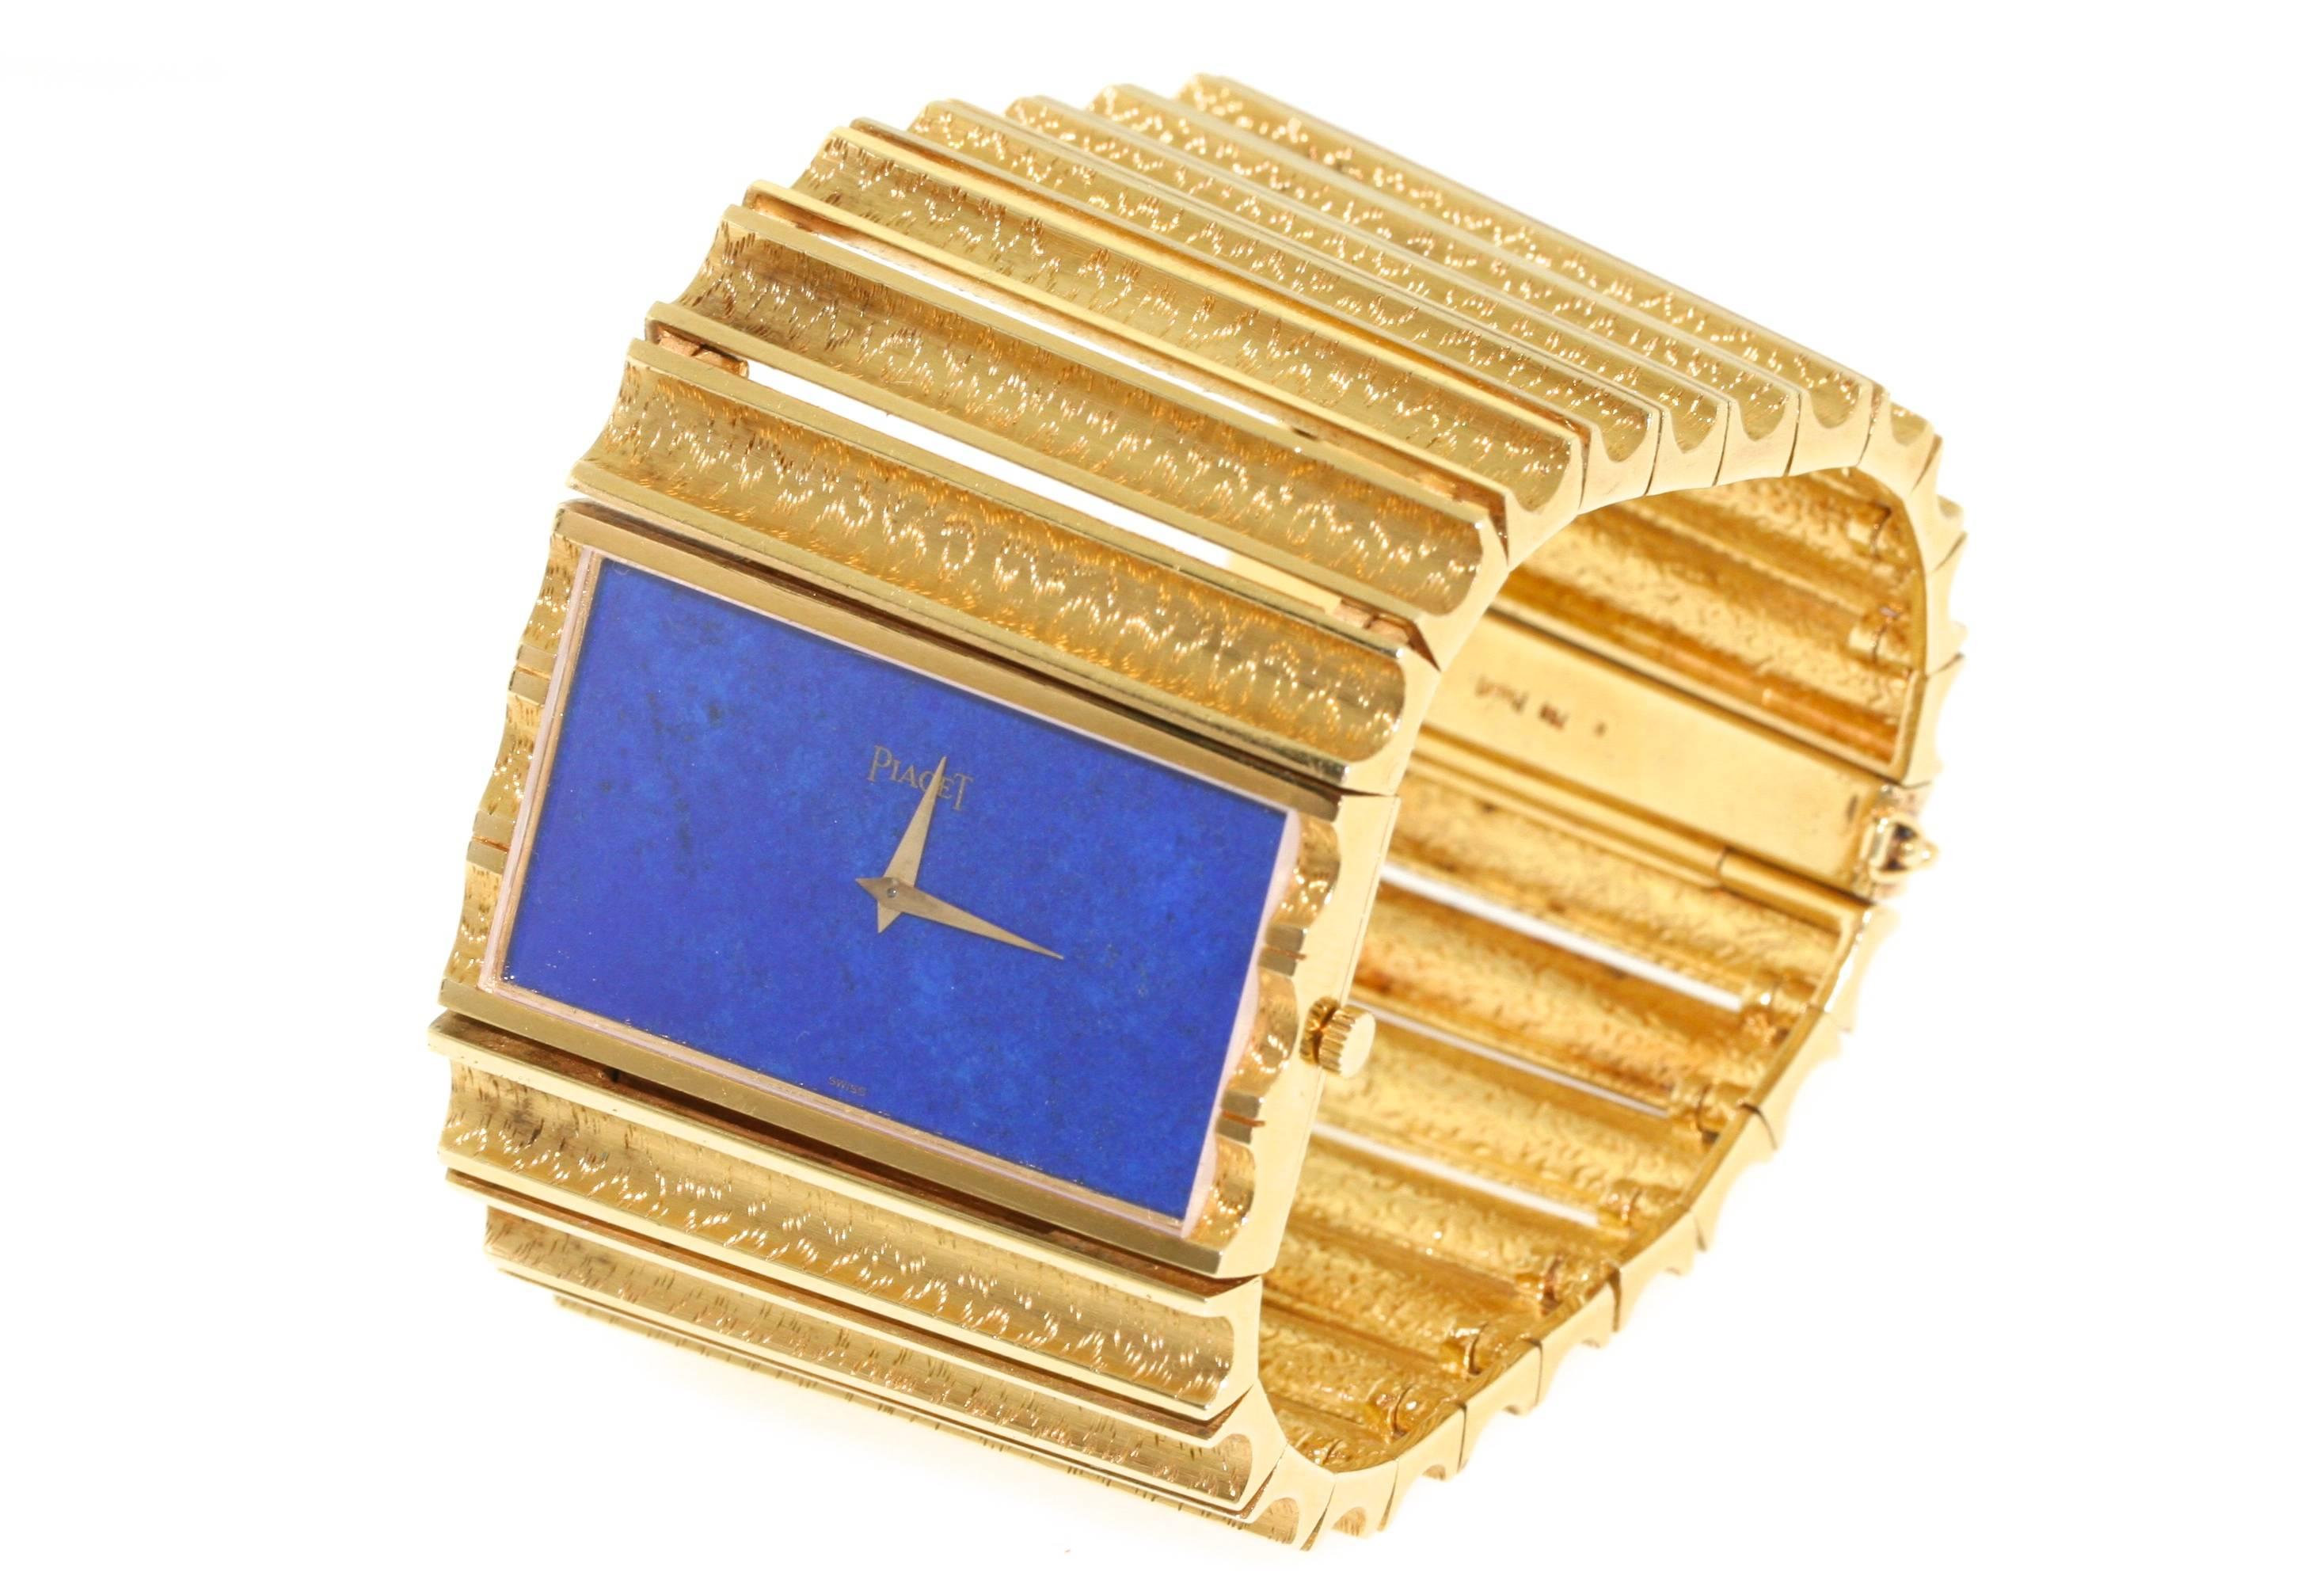 Piaget 1970s Gold and Lapis Bracelet Watch 1